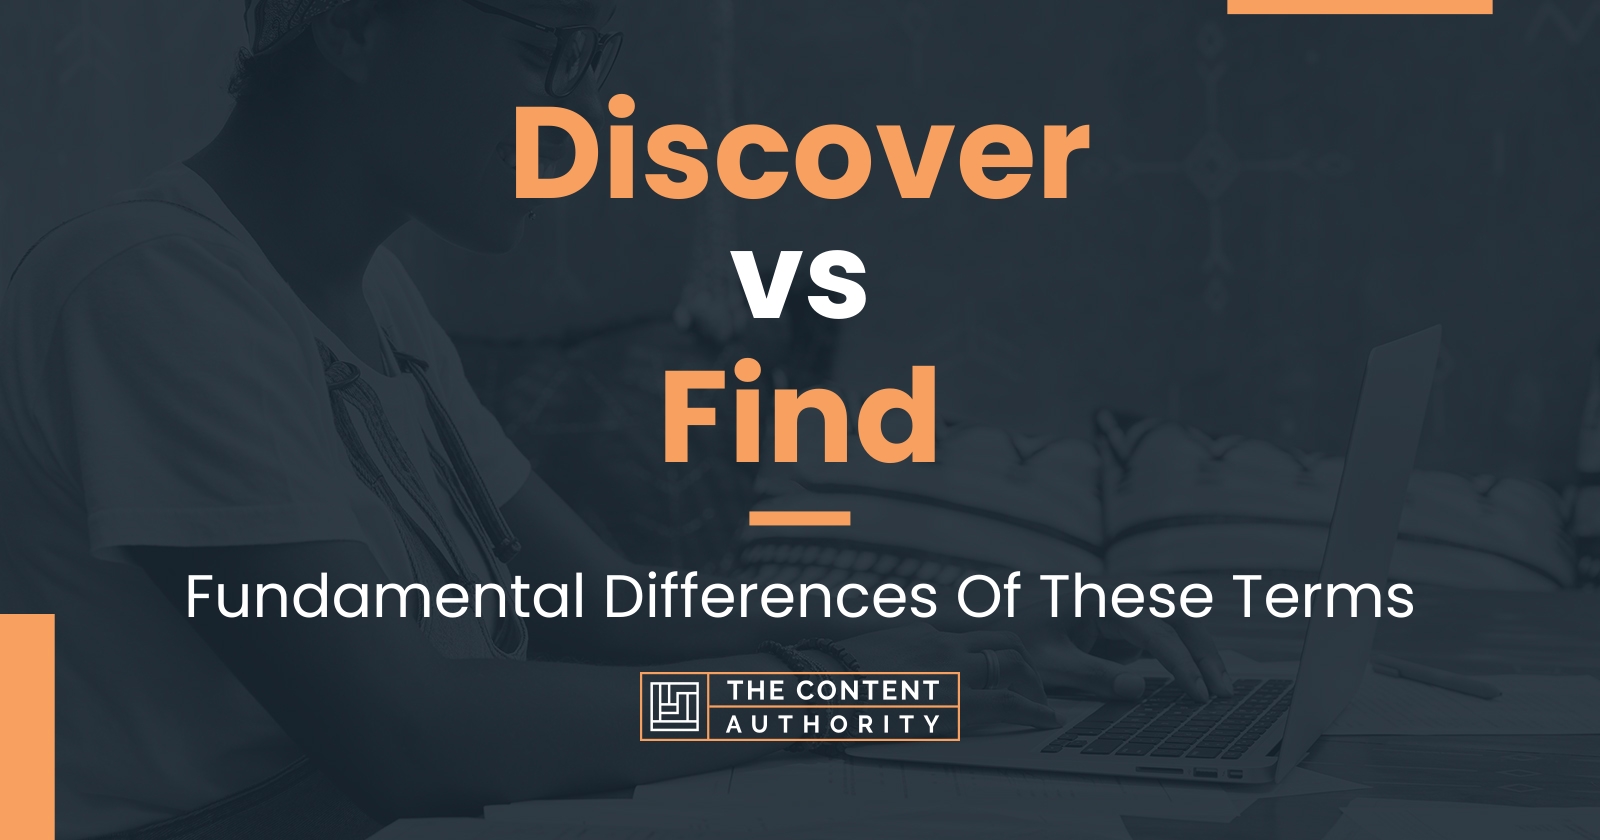 Discover vs Find: Fundamental Differences Of These Terms